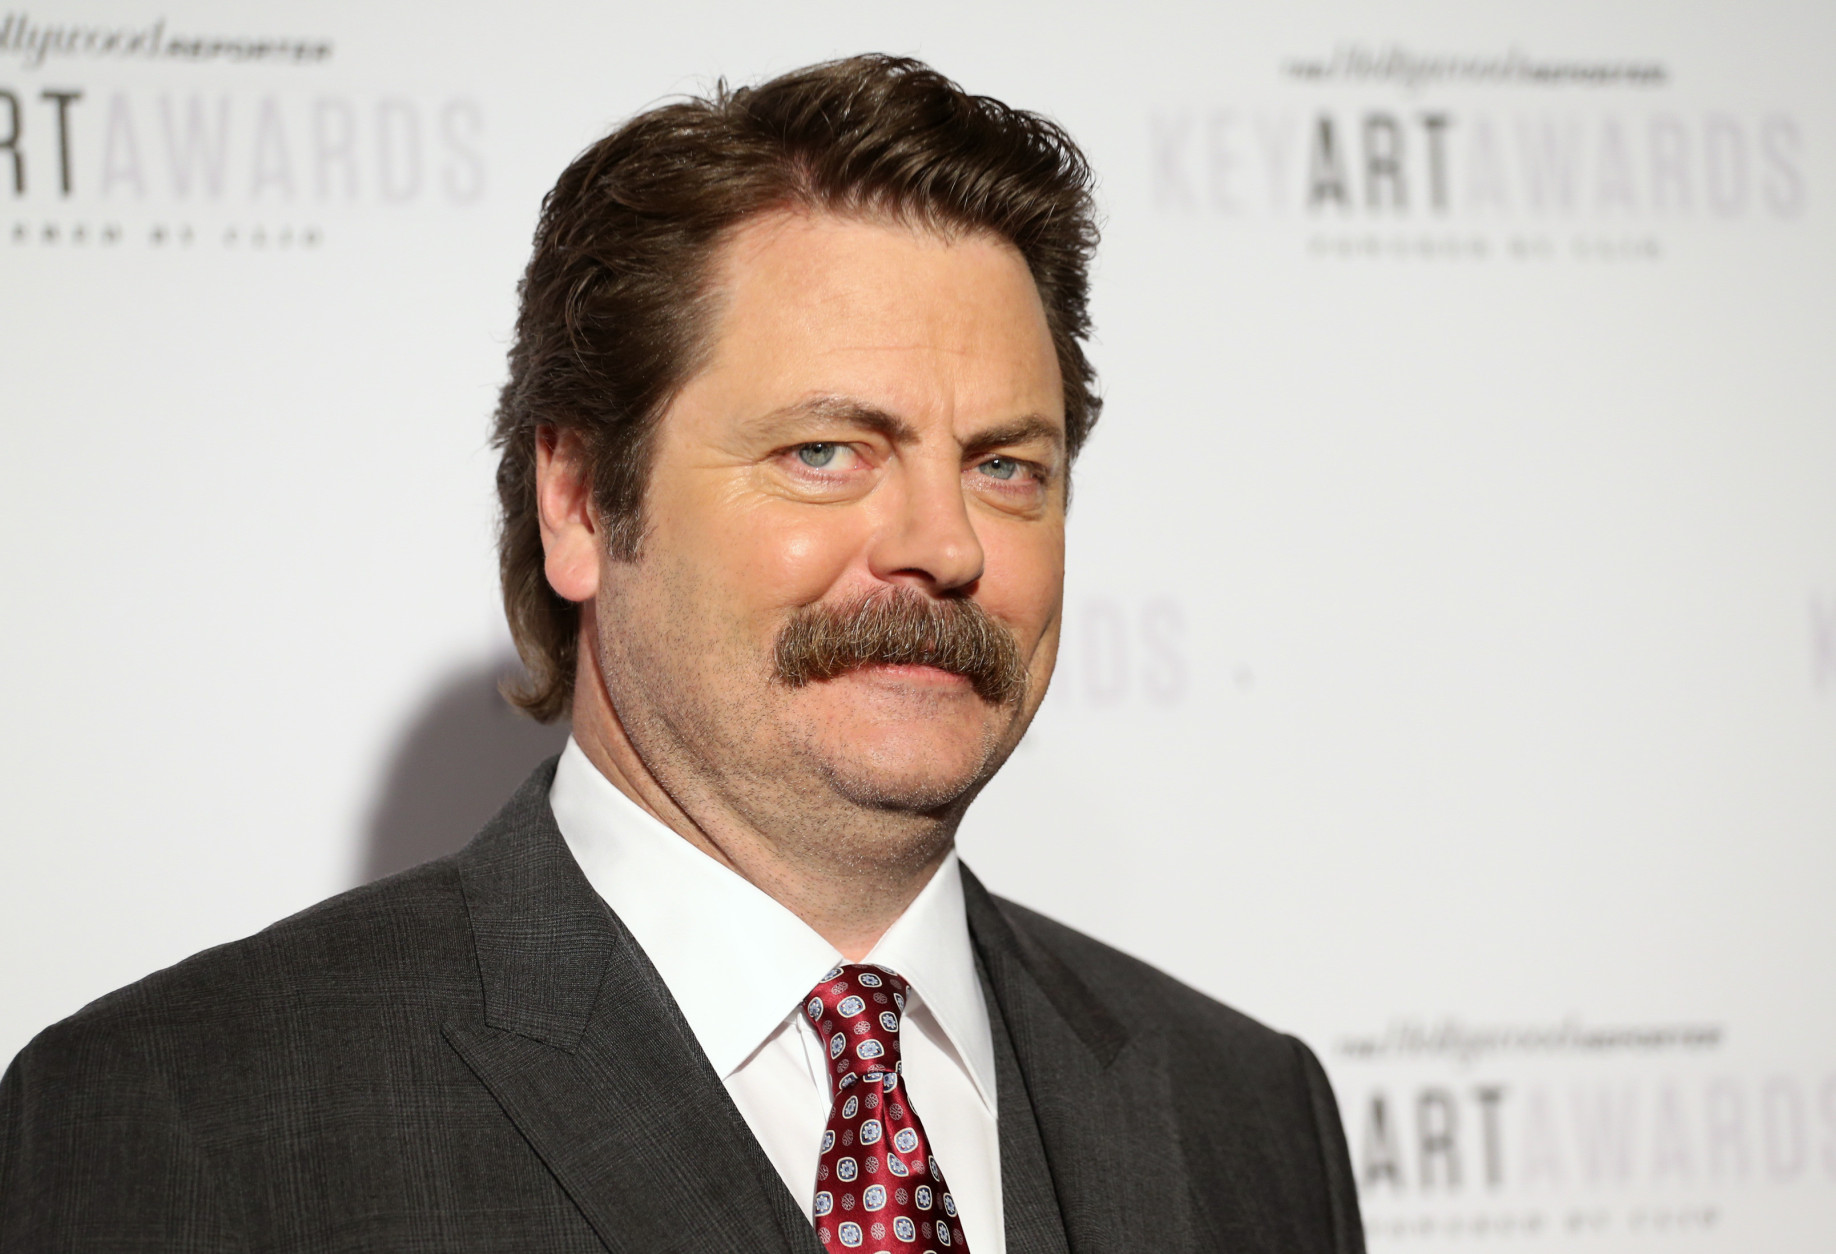 Nick Offerman attends The Hollywood Reporter Key Art Awards Powered by Clio at the Dolby Theatre on Thursday, Oct.  23, 2014, in Los Angeles. (Photo by Omar Vega/Invision for The Hollywood Reporter/AP Images)